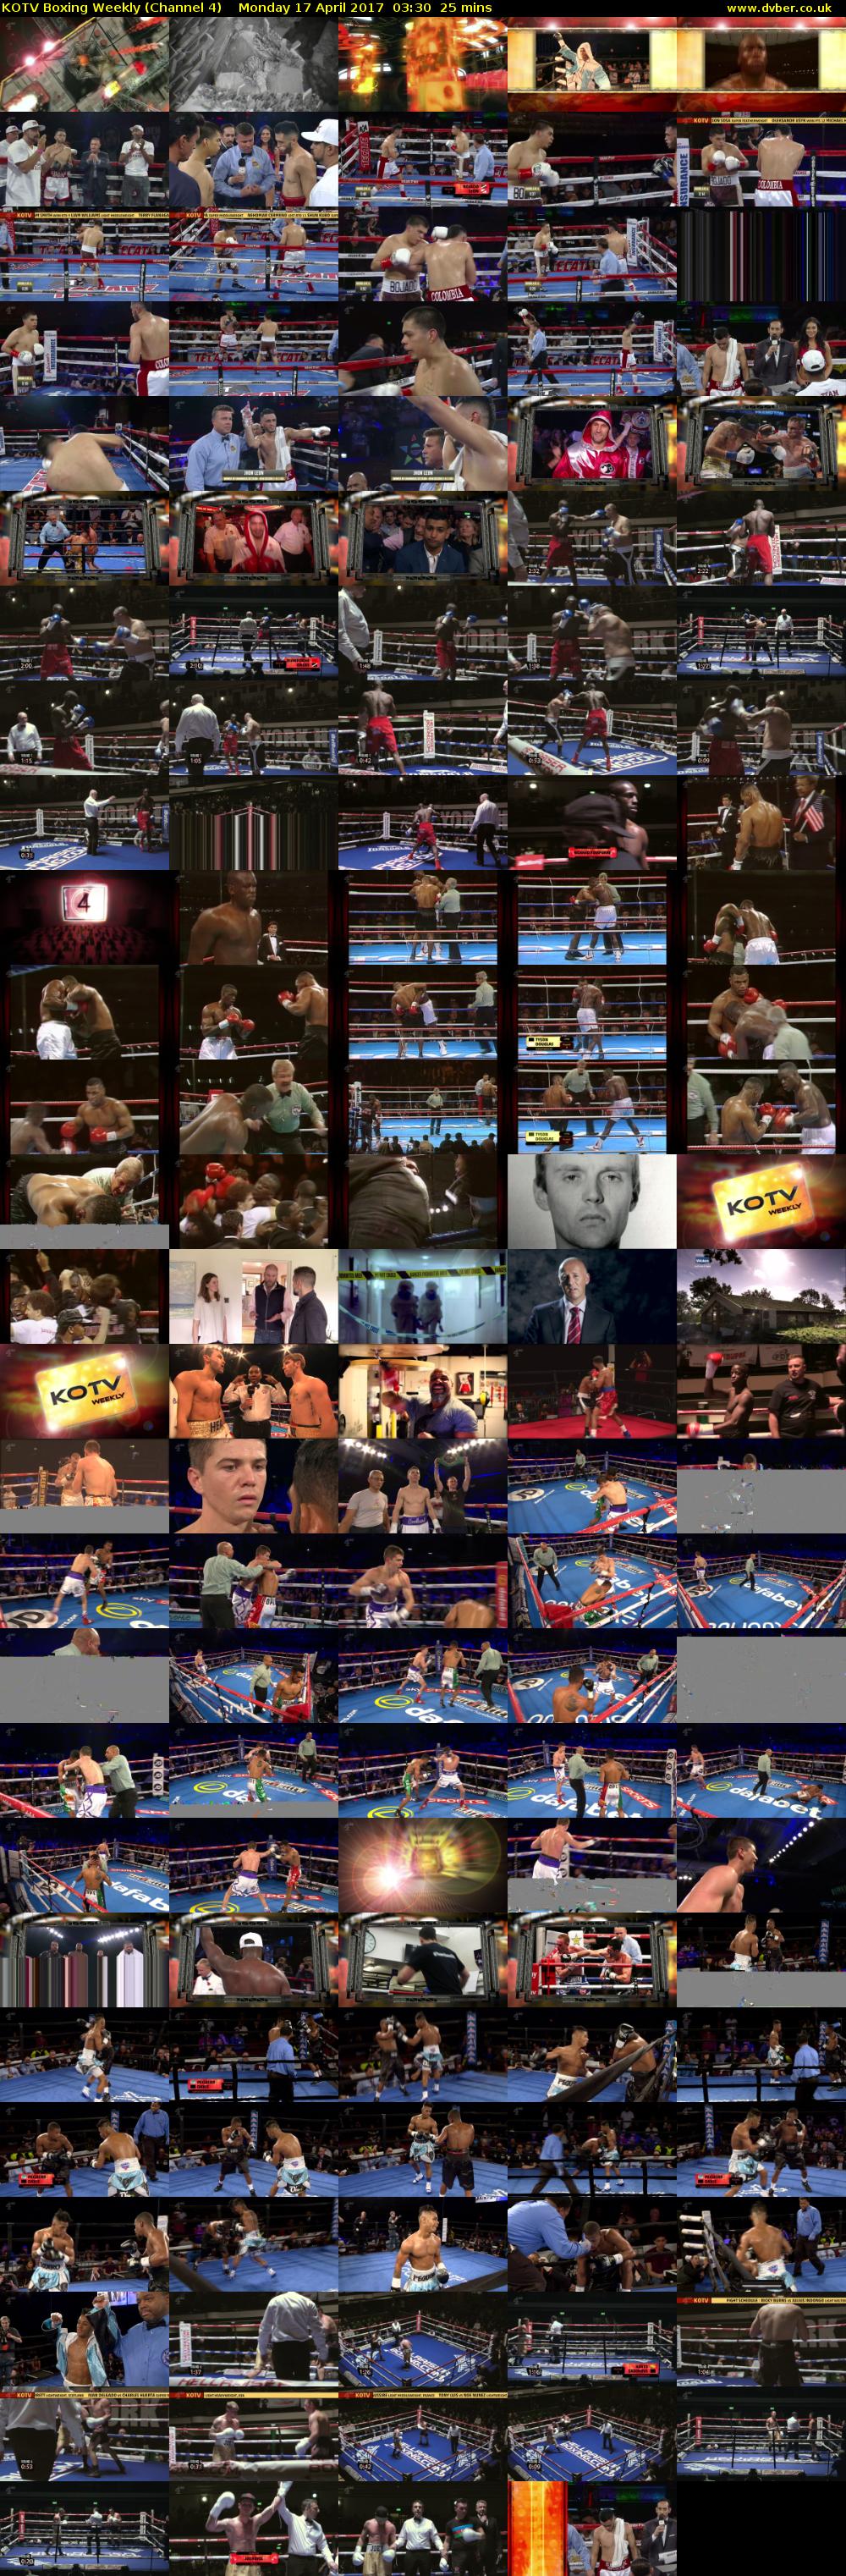 KOTV Boxing Weekly (Channel 4) Monday 17 April 2017 03:30 - 03:55